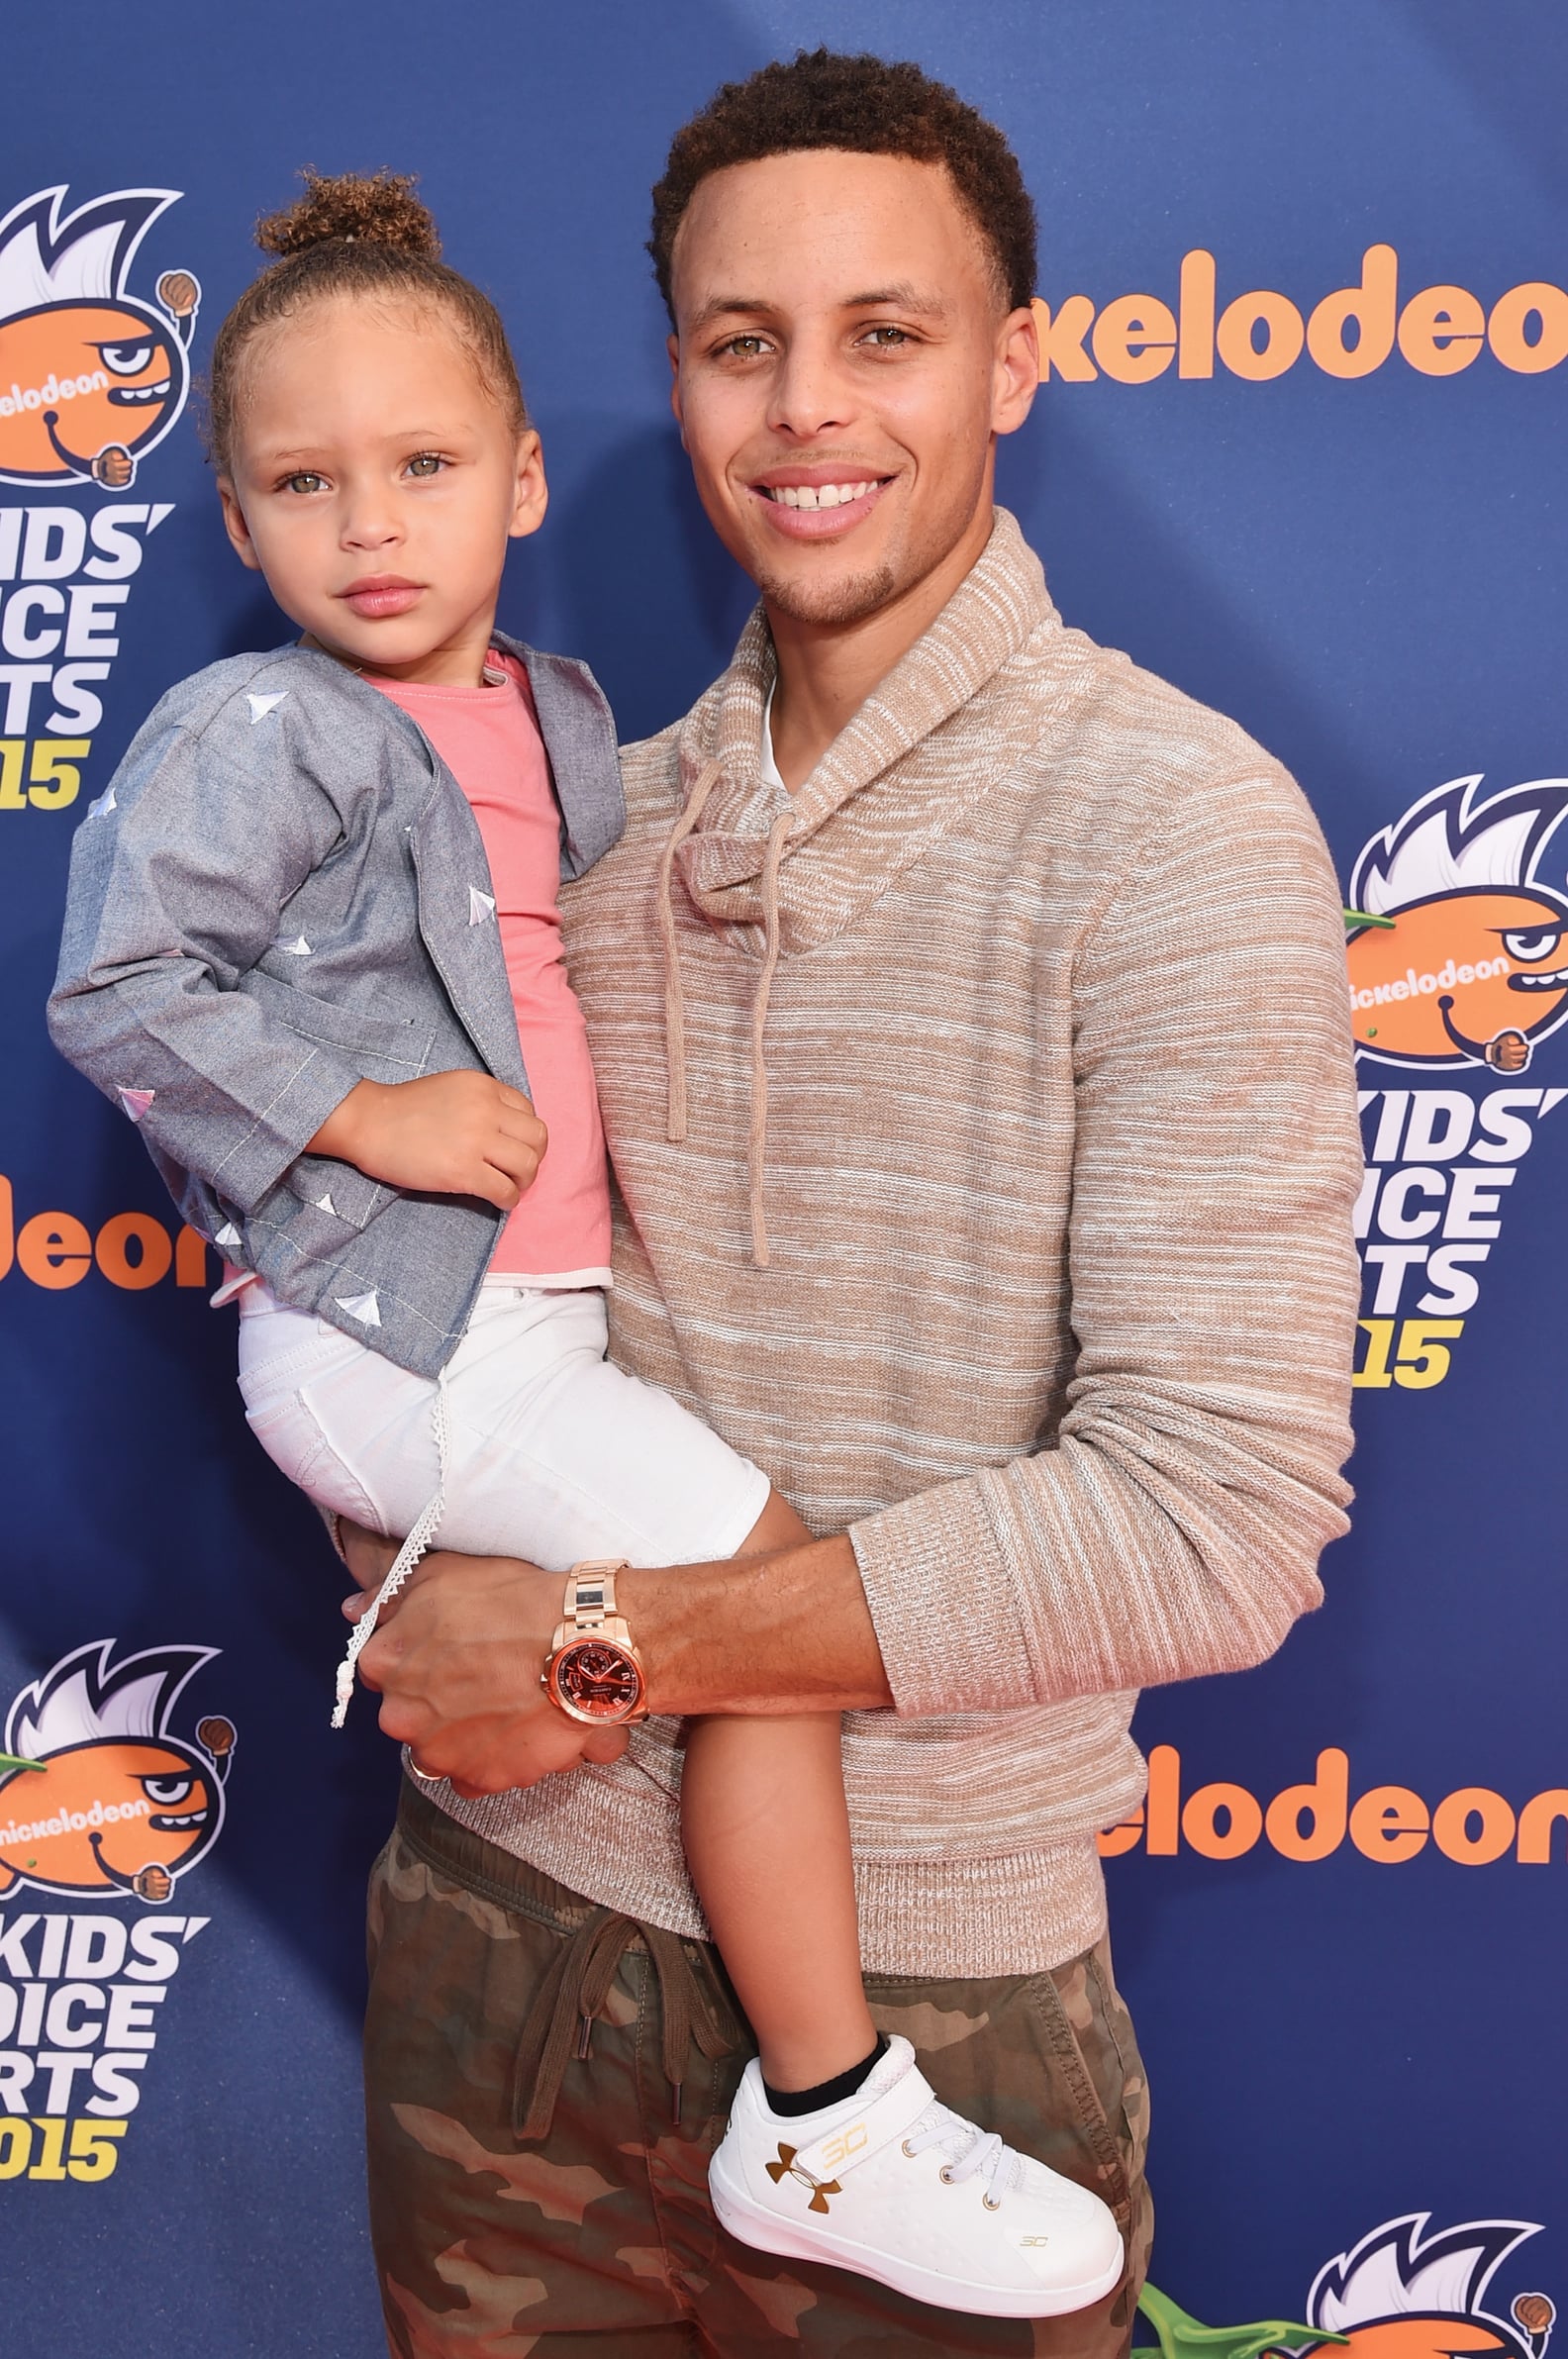 likhoa stephen curry shares heartfelt throwback moments with daughter riley from years ago surprising online community 654264d67ee67 Stephen Curry Shares Heartfelt Throwback Moments With Daughter Riley From 10 Years Ago, Surprising Online Community